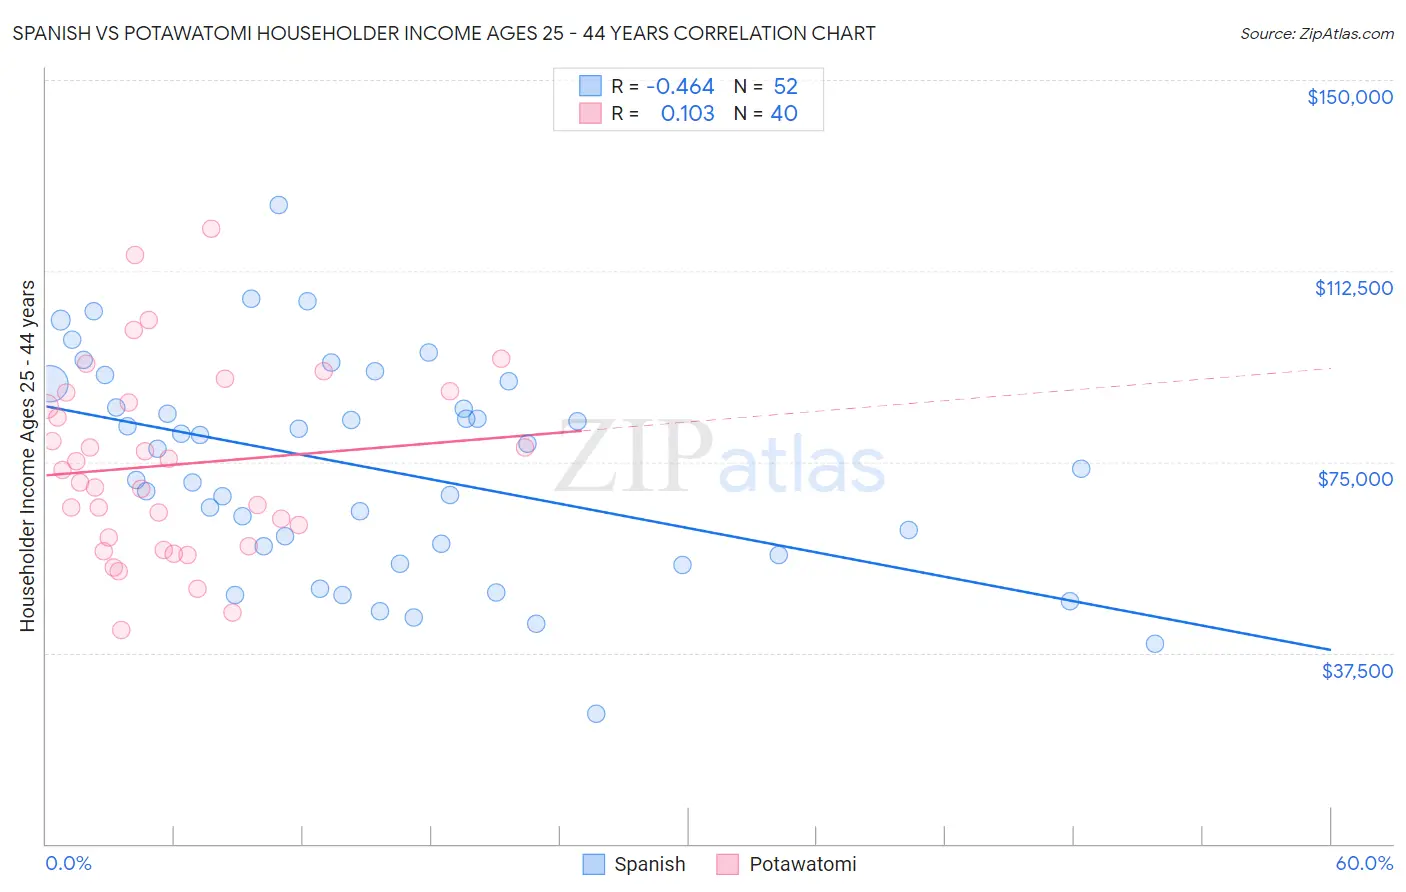 Spanish vs Potawatomi Householder Income Ages 25 - 44 years